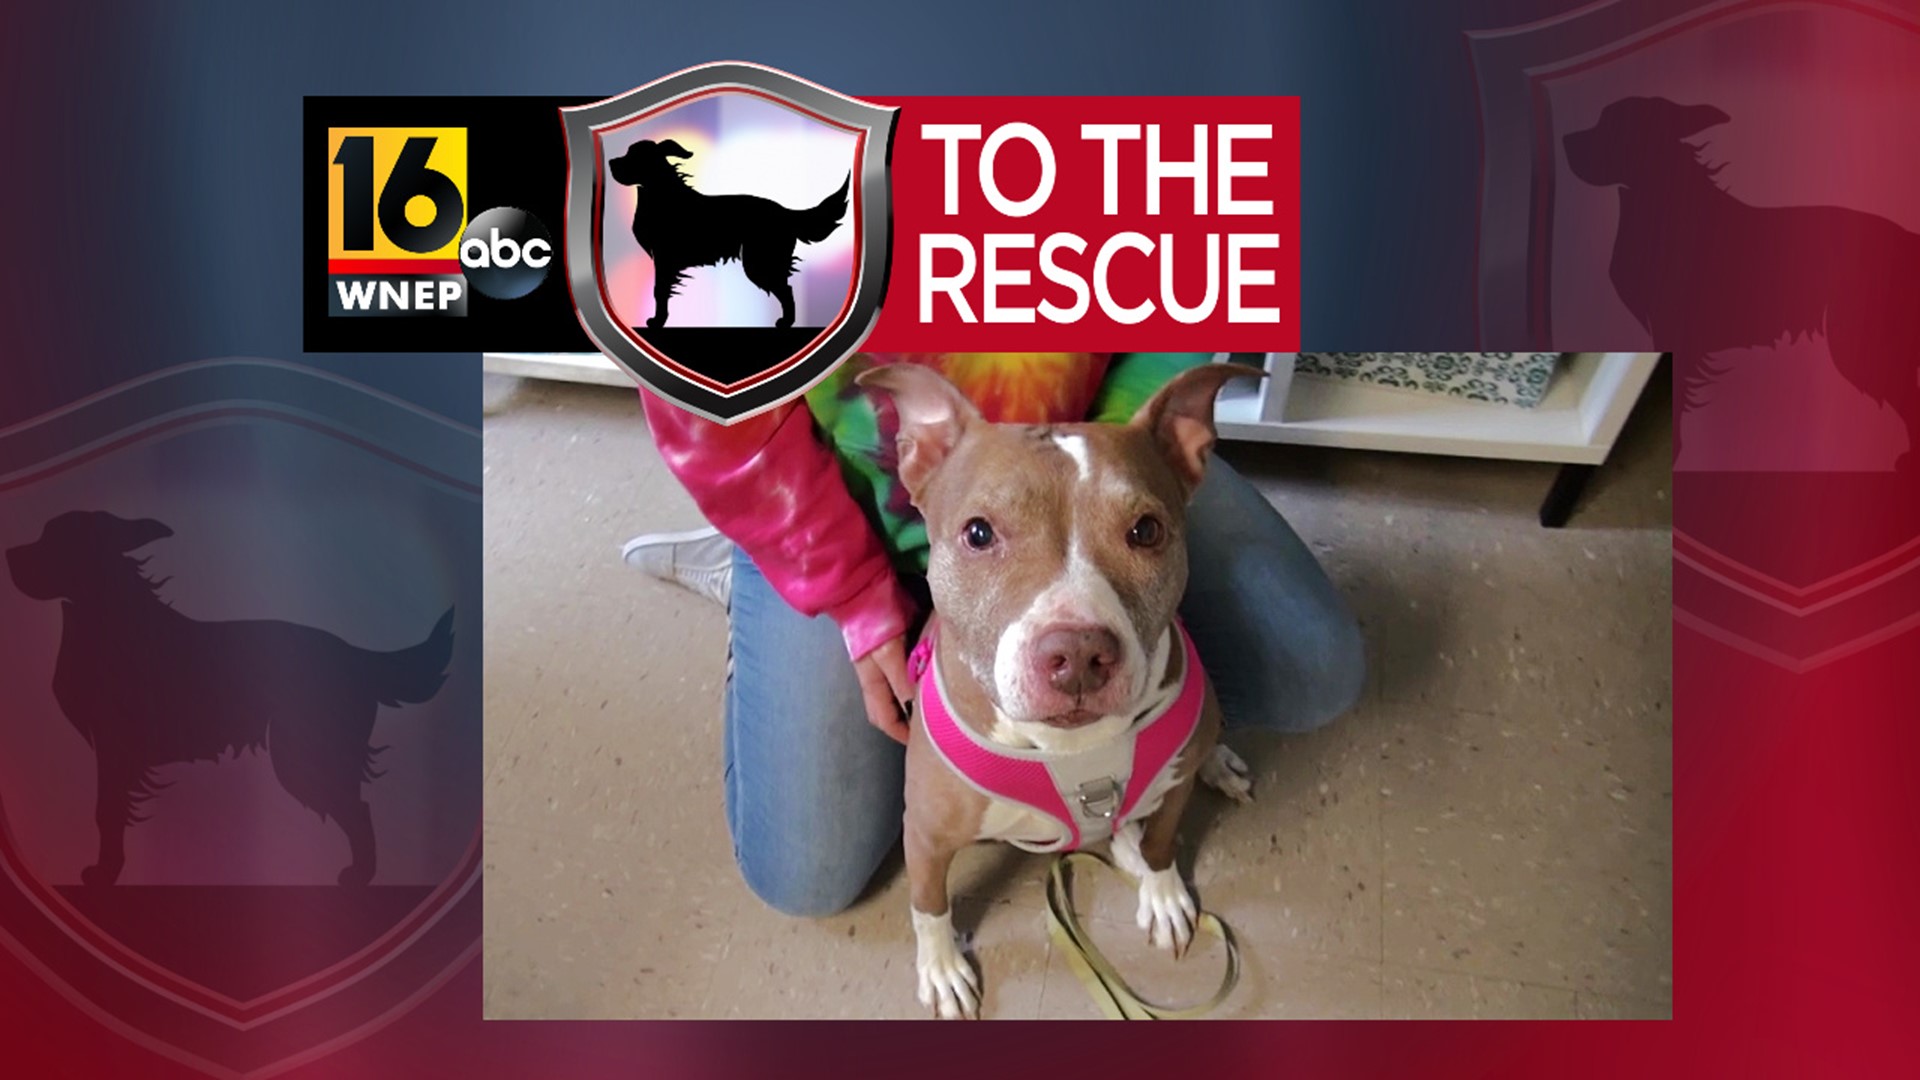 In this week's 16 To The Rescue, we meet a pit bull/mix who is a little bit older and looking for the perfect couch to cuddle on.